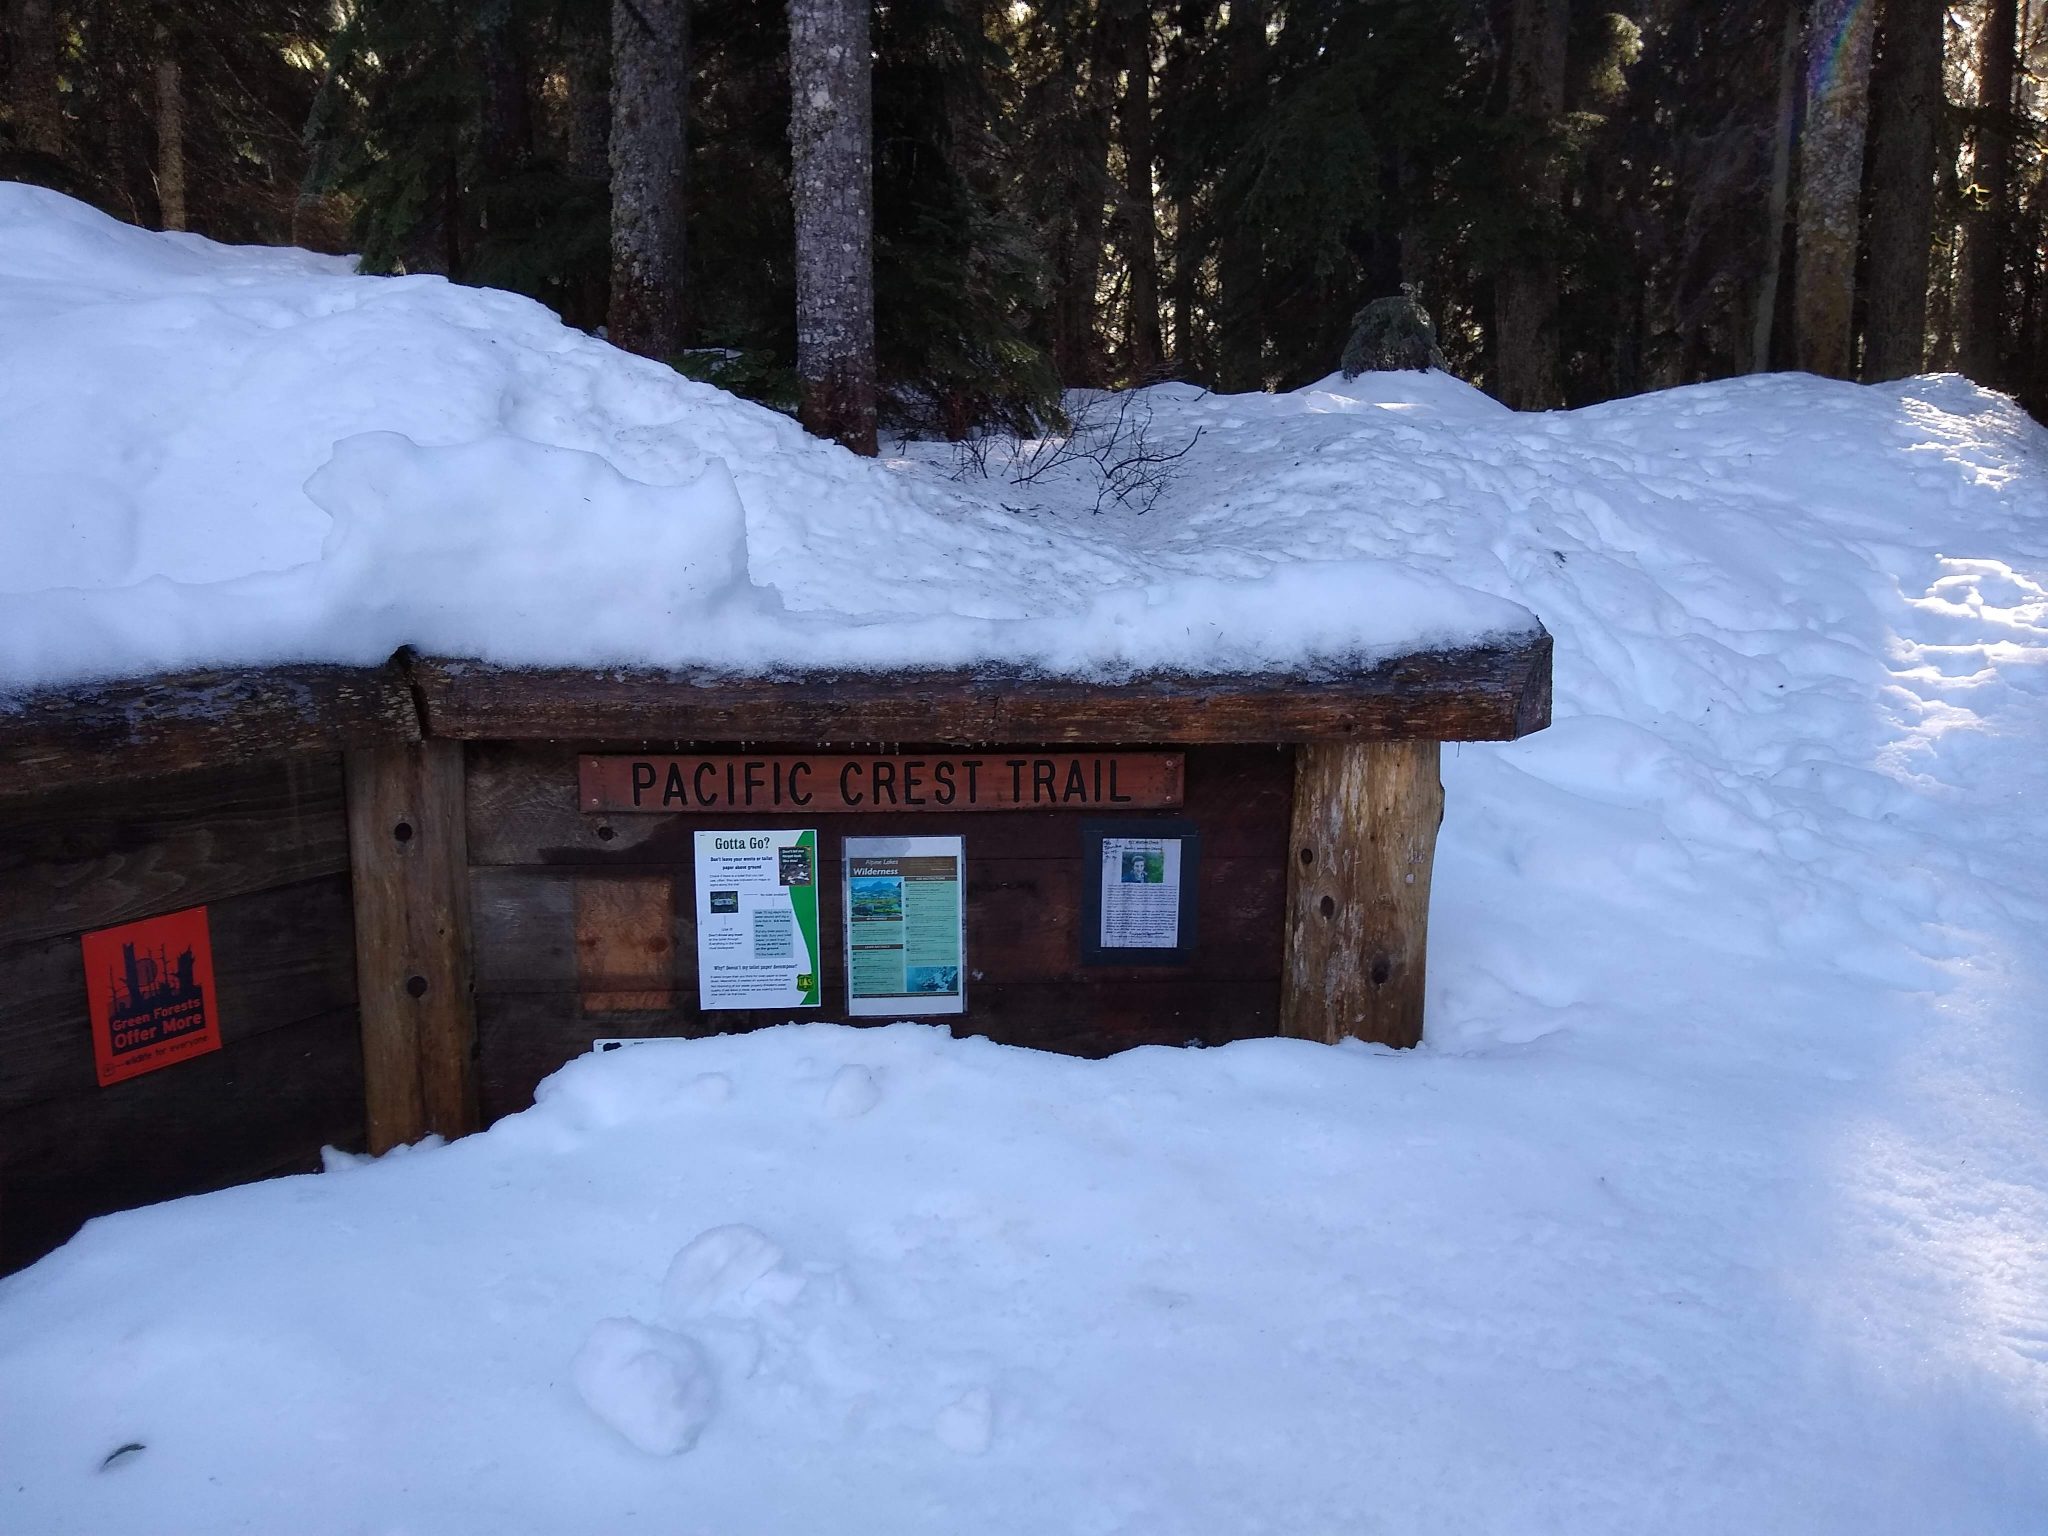 Trail sign for Pacific Crest Trail partially covered with deep snow